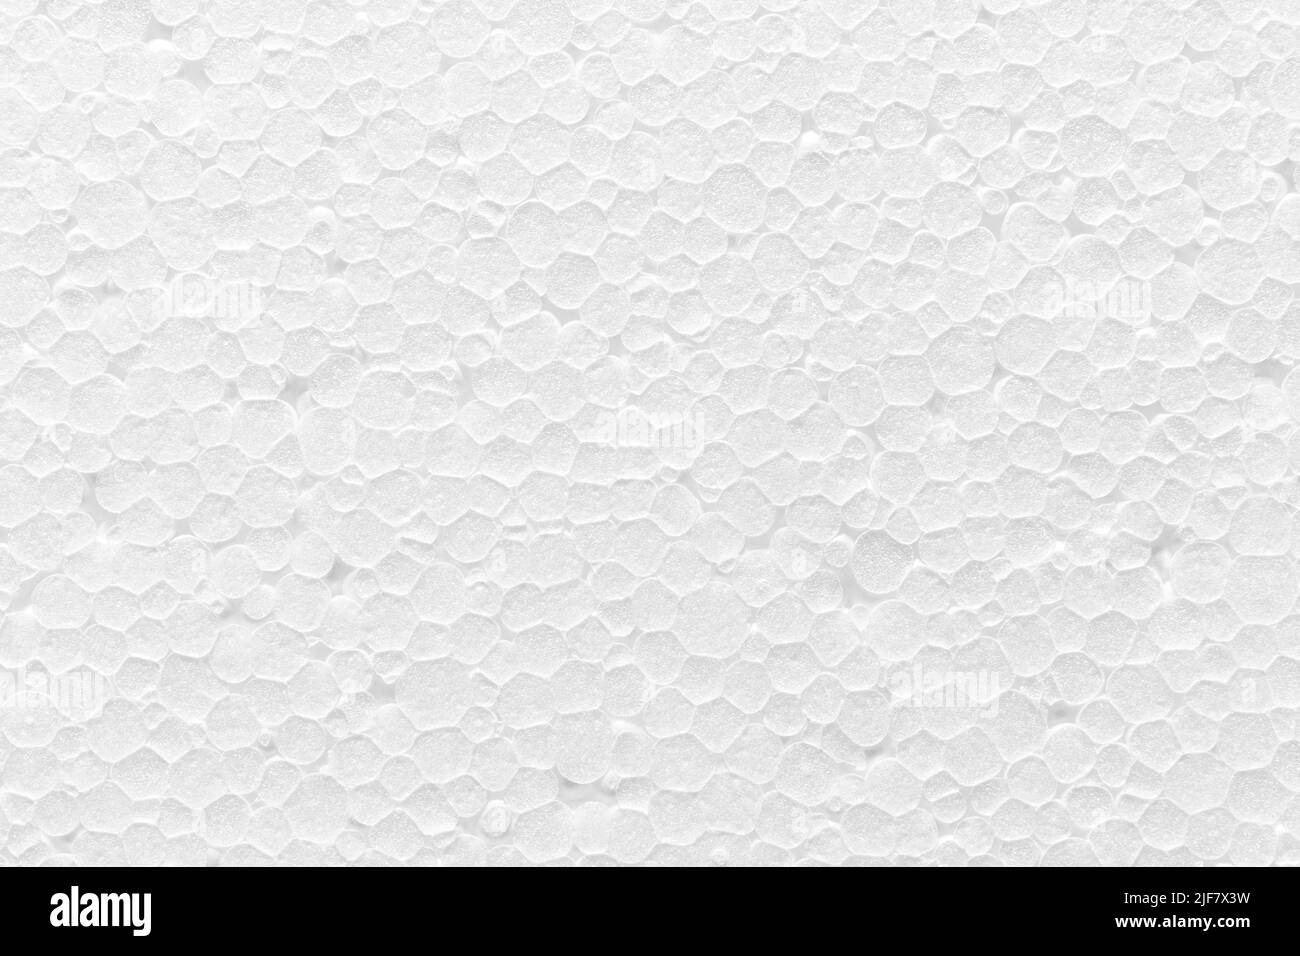 Polystyrene packing chips Black and White Stock Photos & Images - Alamy